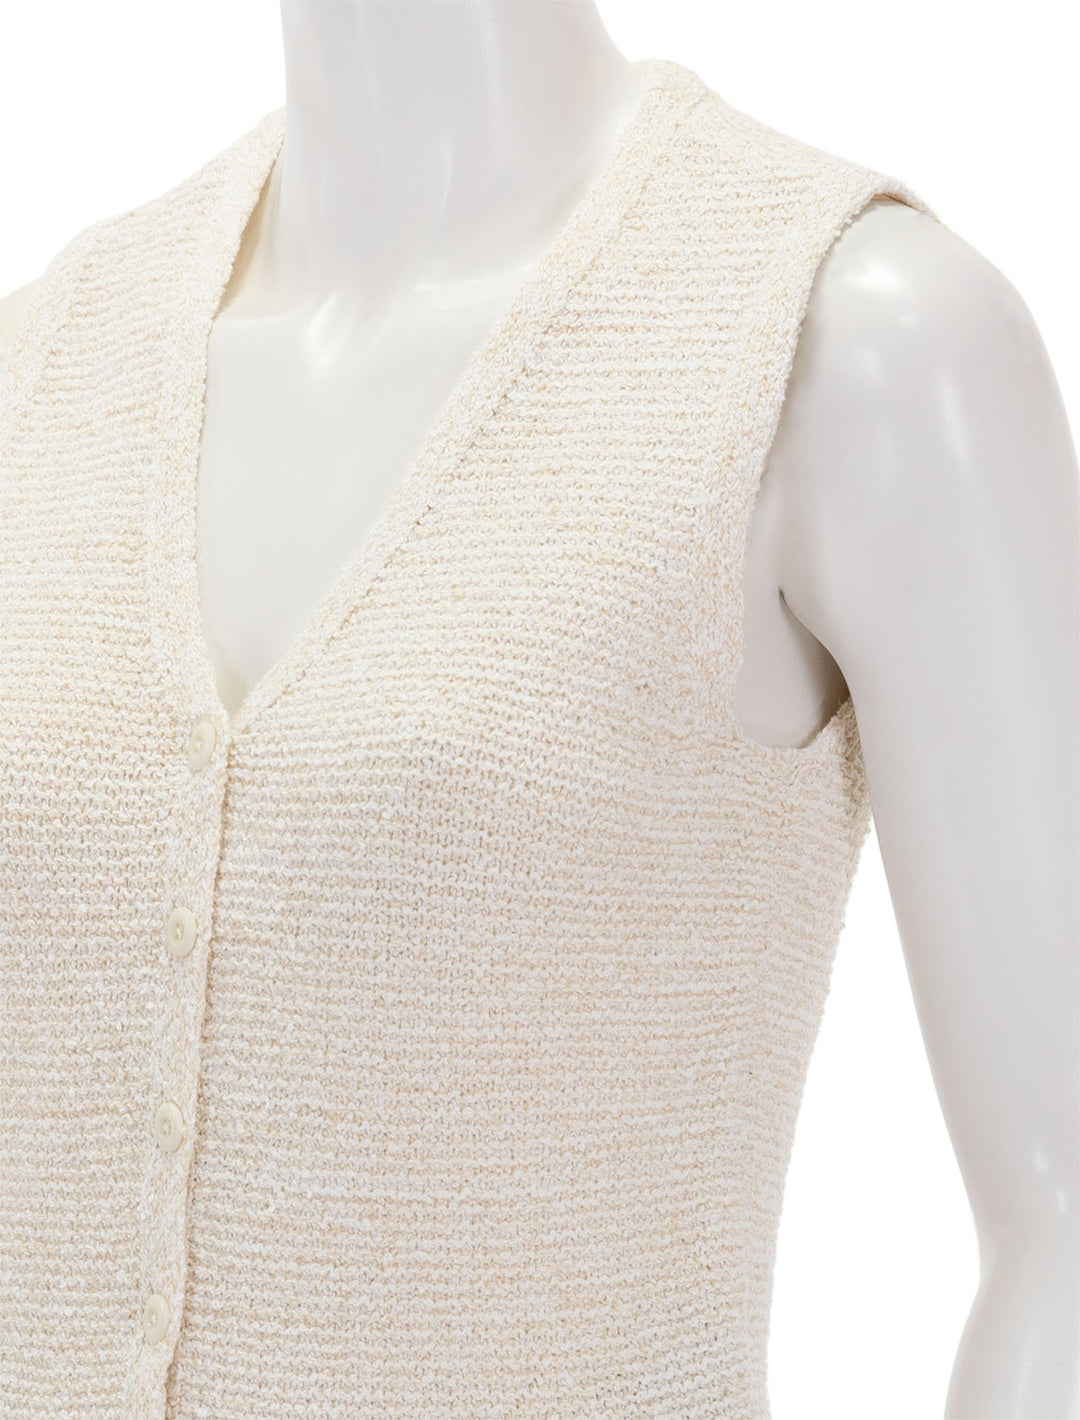 Close-up view of Rag & Bone's jackie sweater vest in ivory.